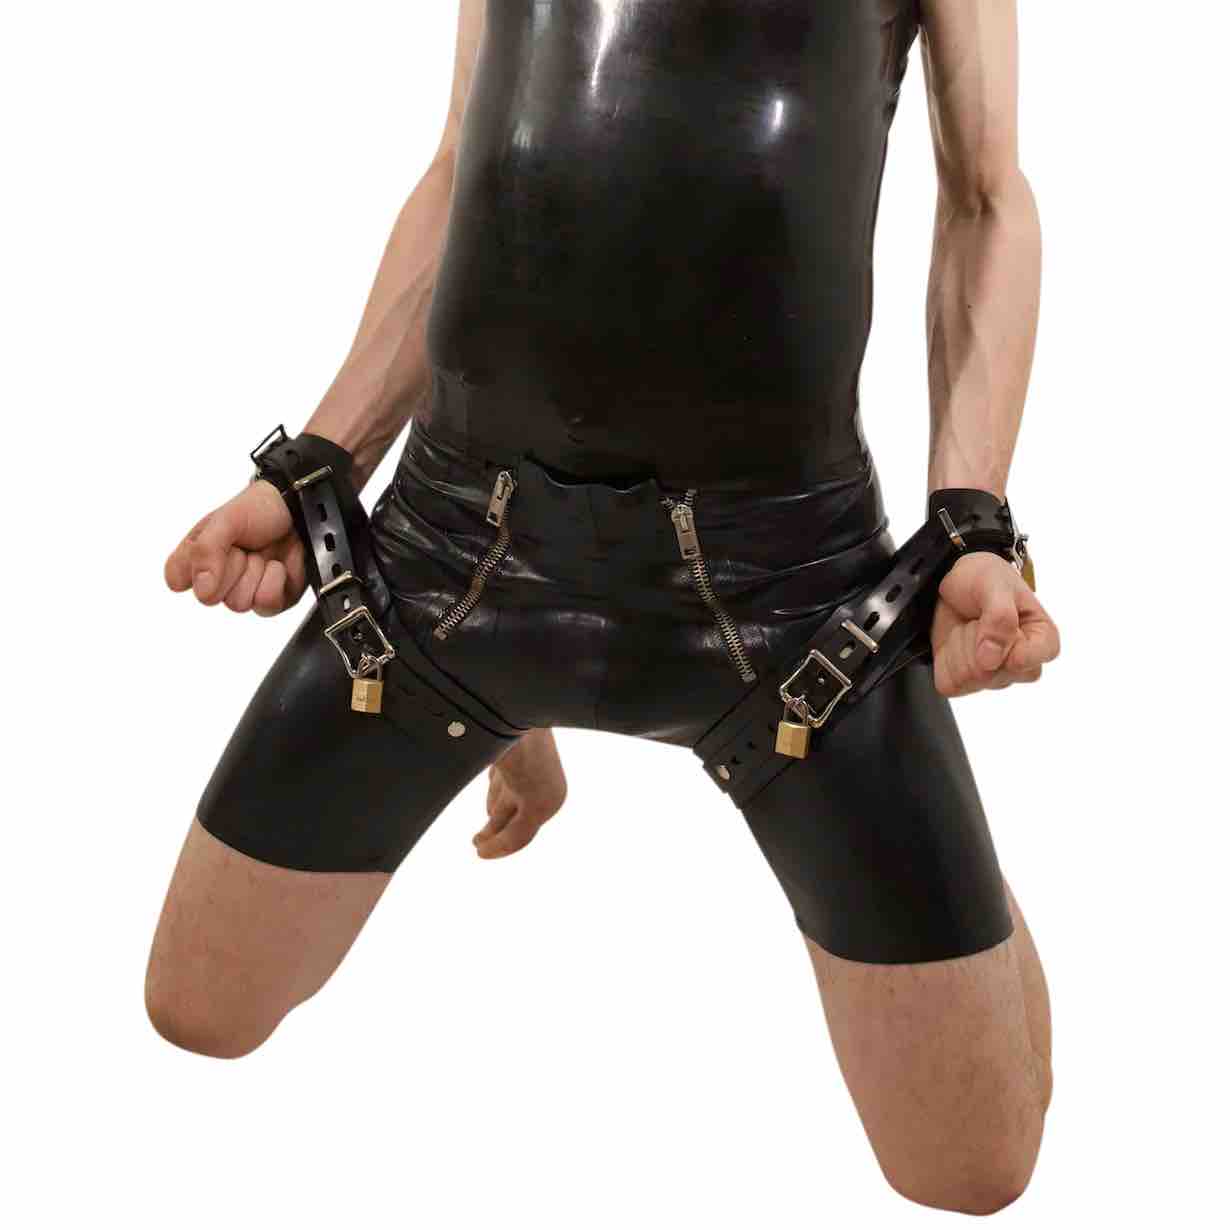 A model kneeling, wearing the Heavy Rubber Wrist to Thigh Restraint Cuffs over a black rubber outfit.